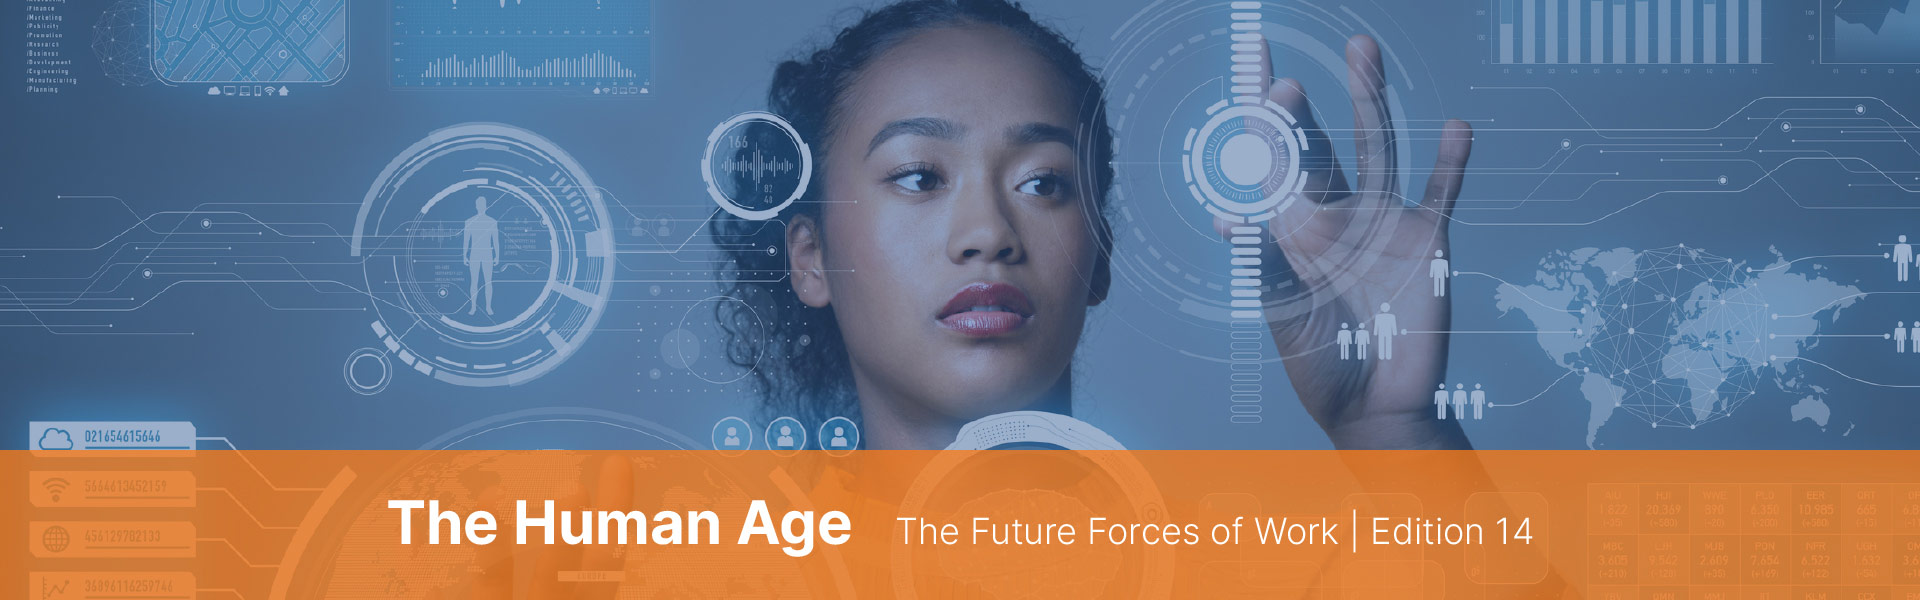 The Human Age Edition 14: The Future Forces of Work